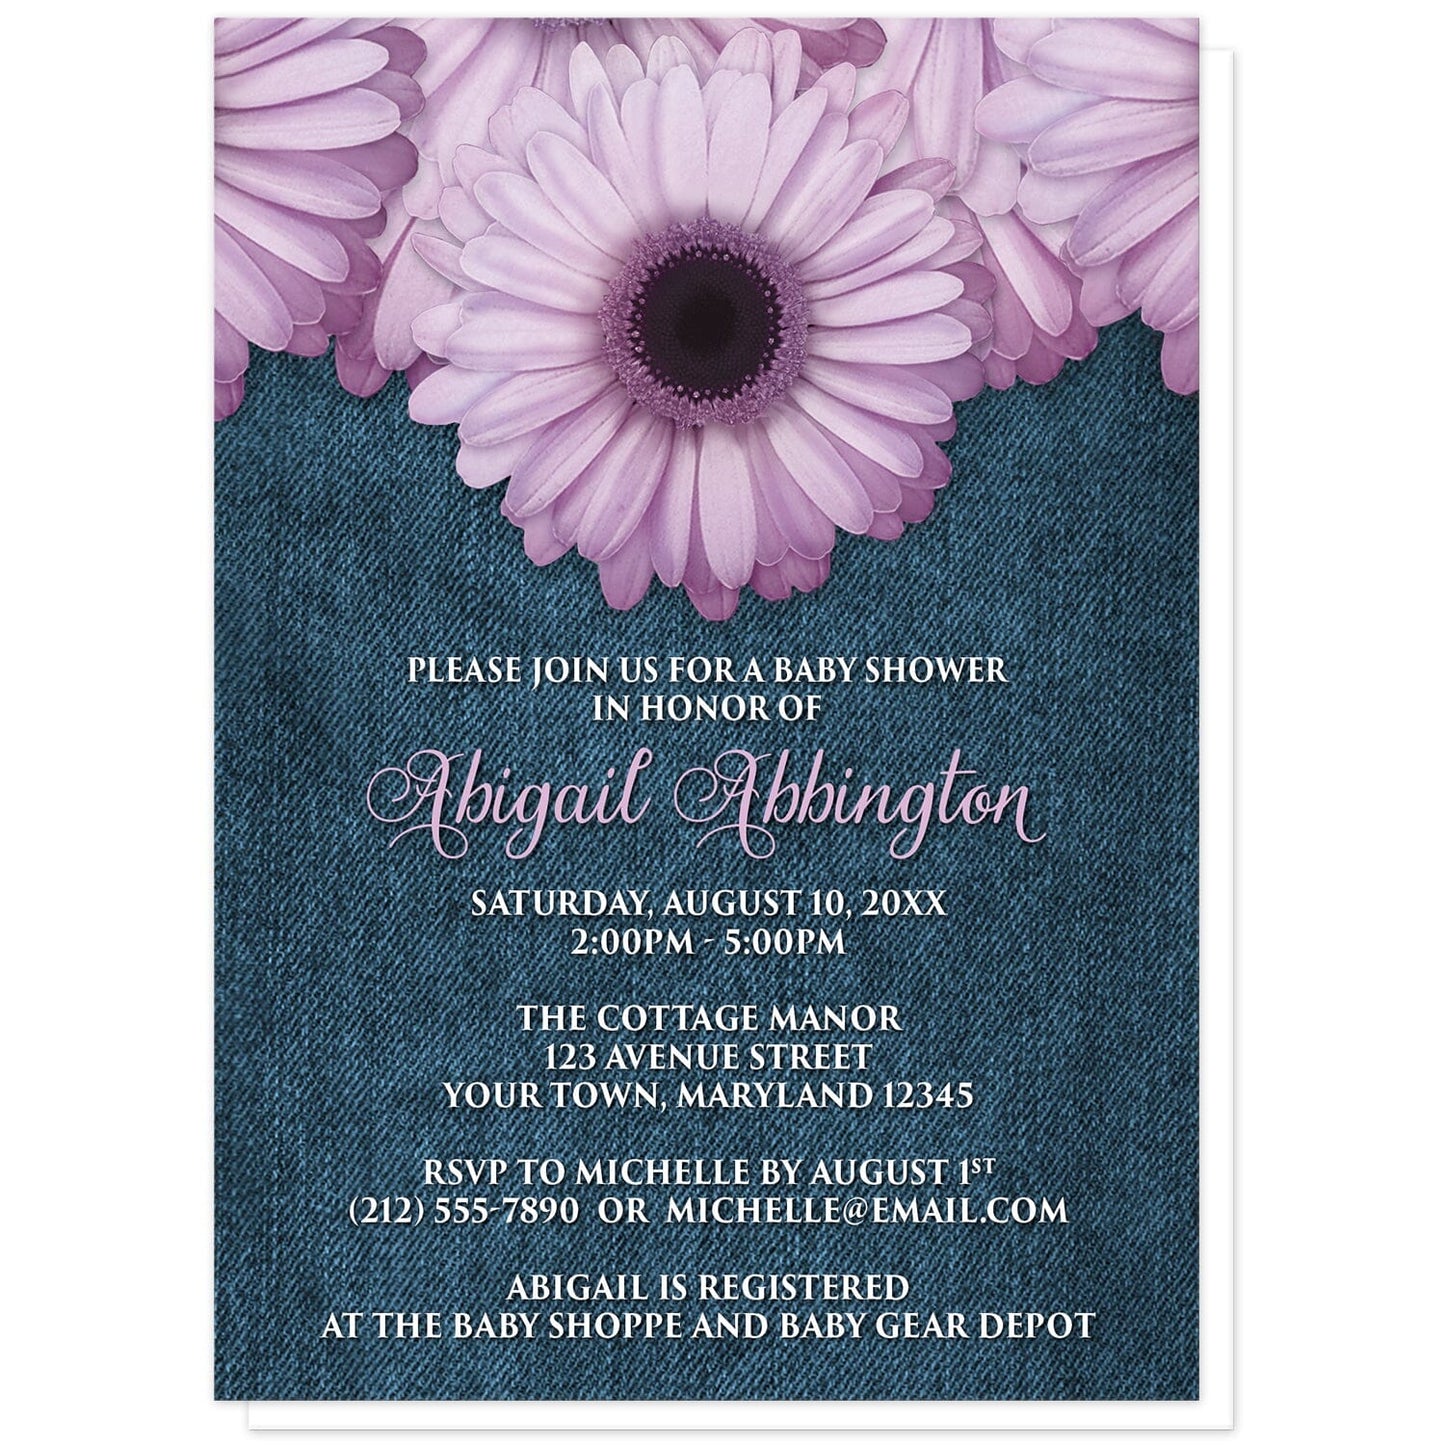 Rustic Purple Daisy Denim Baby Shower Invitations at Artistically Invited. Rustic purple daisy denim baby shower invitations designed with large and lovely purple daisy flowers along the top over a country blue denim illustration. Your personalized baby shower celebration details are custom printed in a whimsical purple script font for the name and the remaining details are represented with an all-capital letters white font on the blue denim background. 